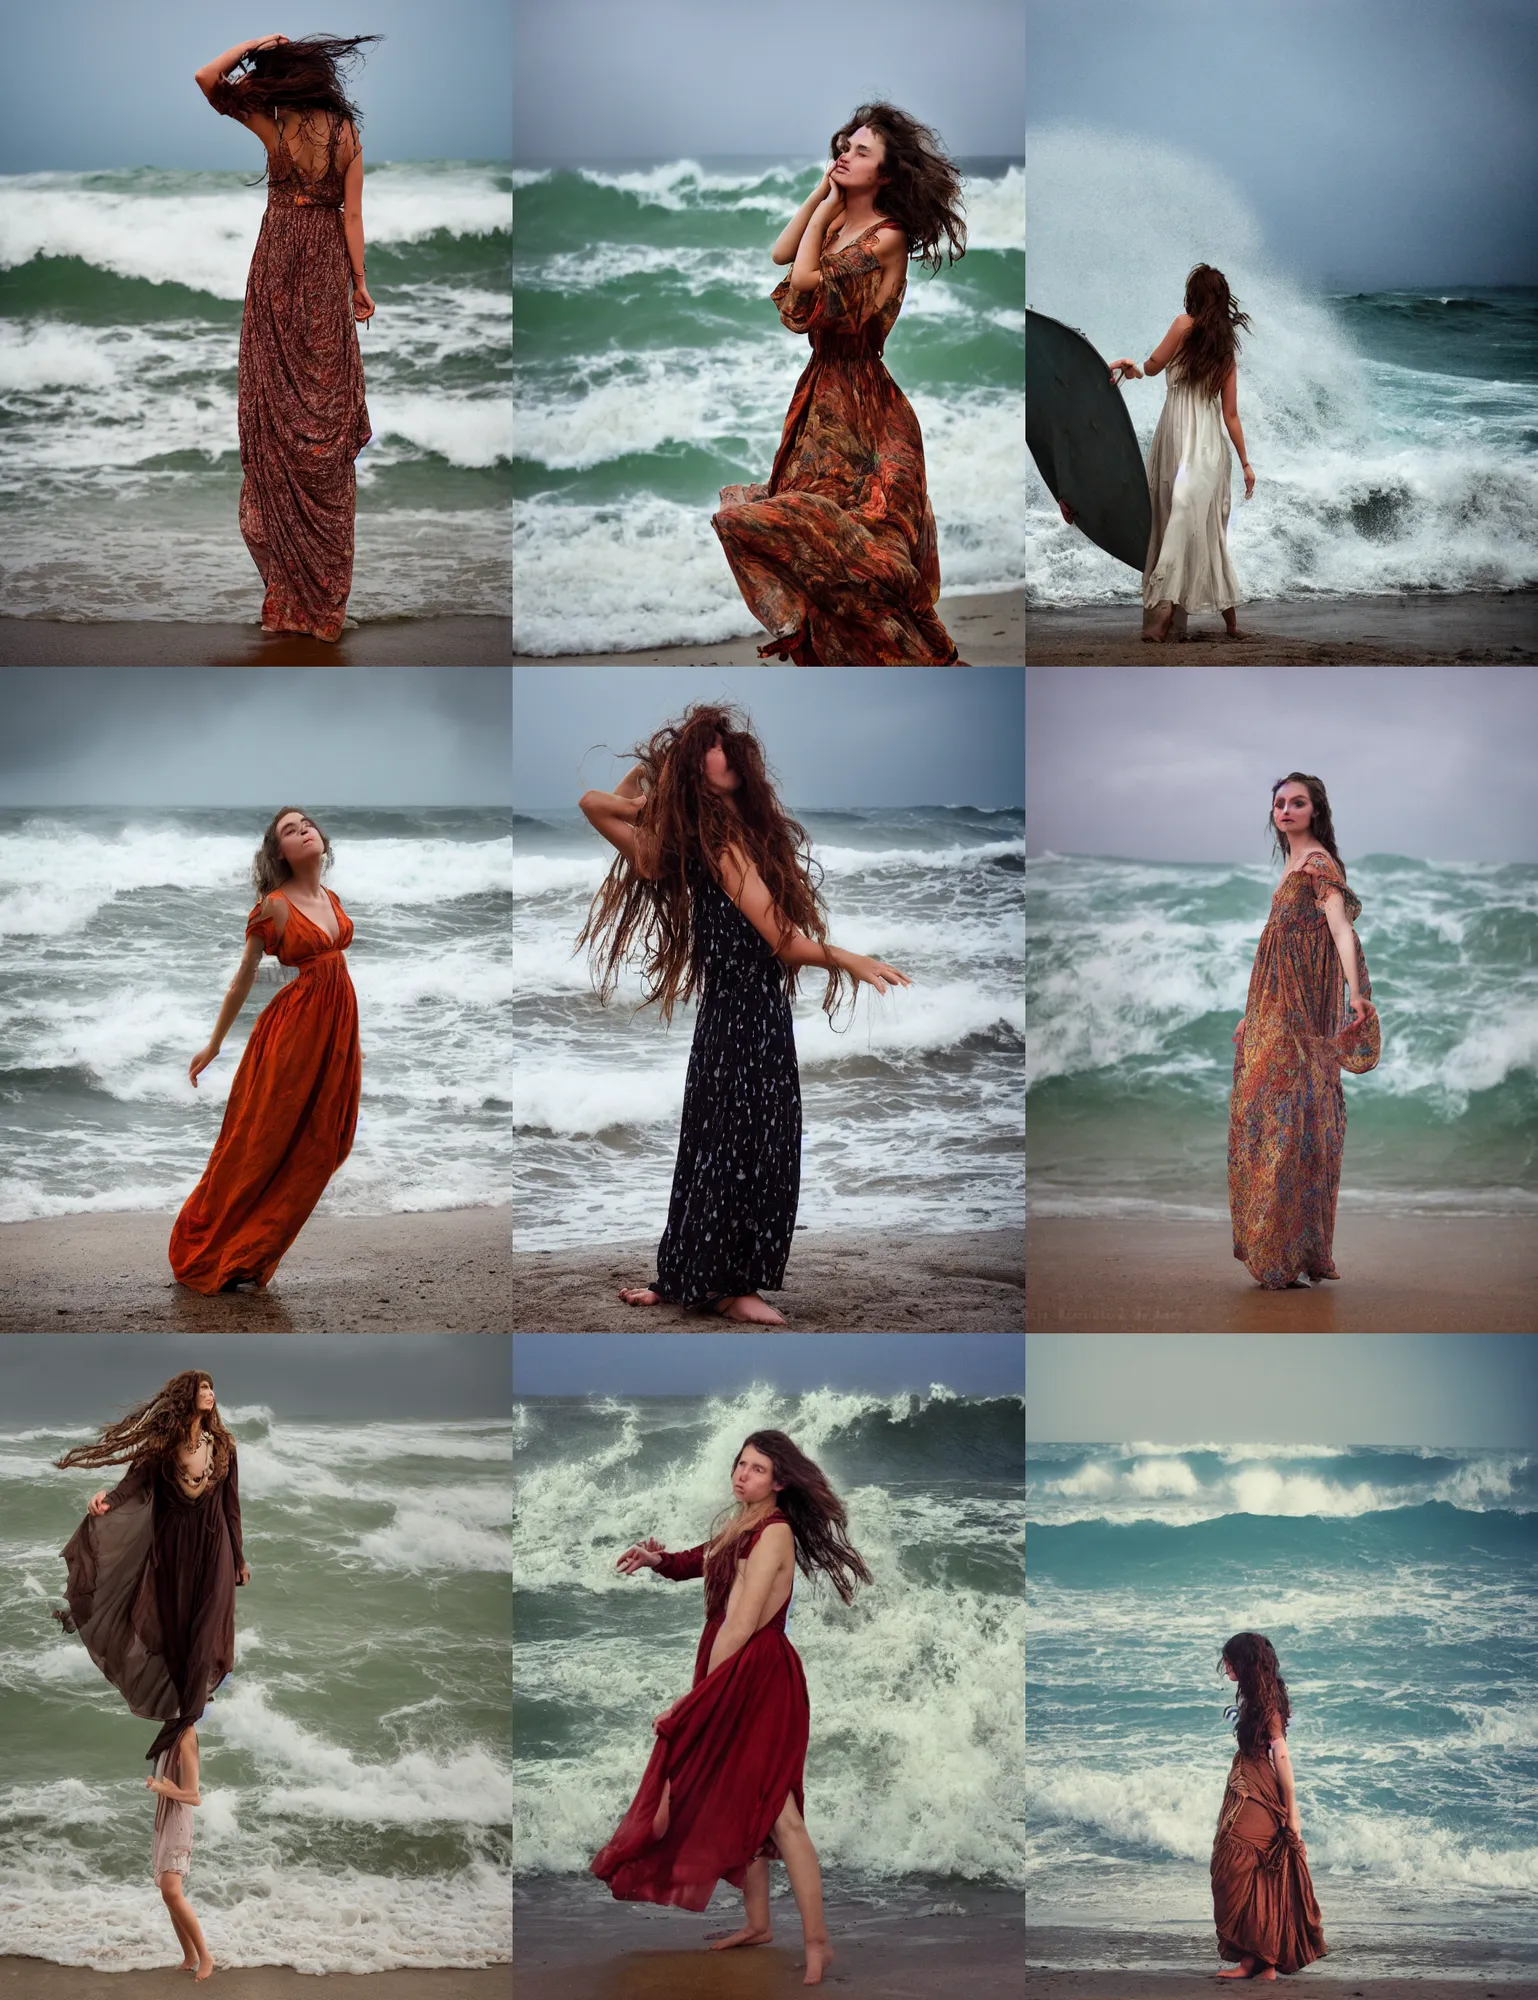 Young woman in dress on beach | Beach photography poses, Girl photography  poses, Beach photoshoot